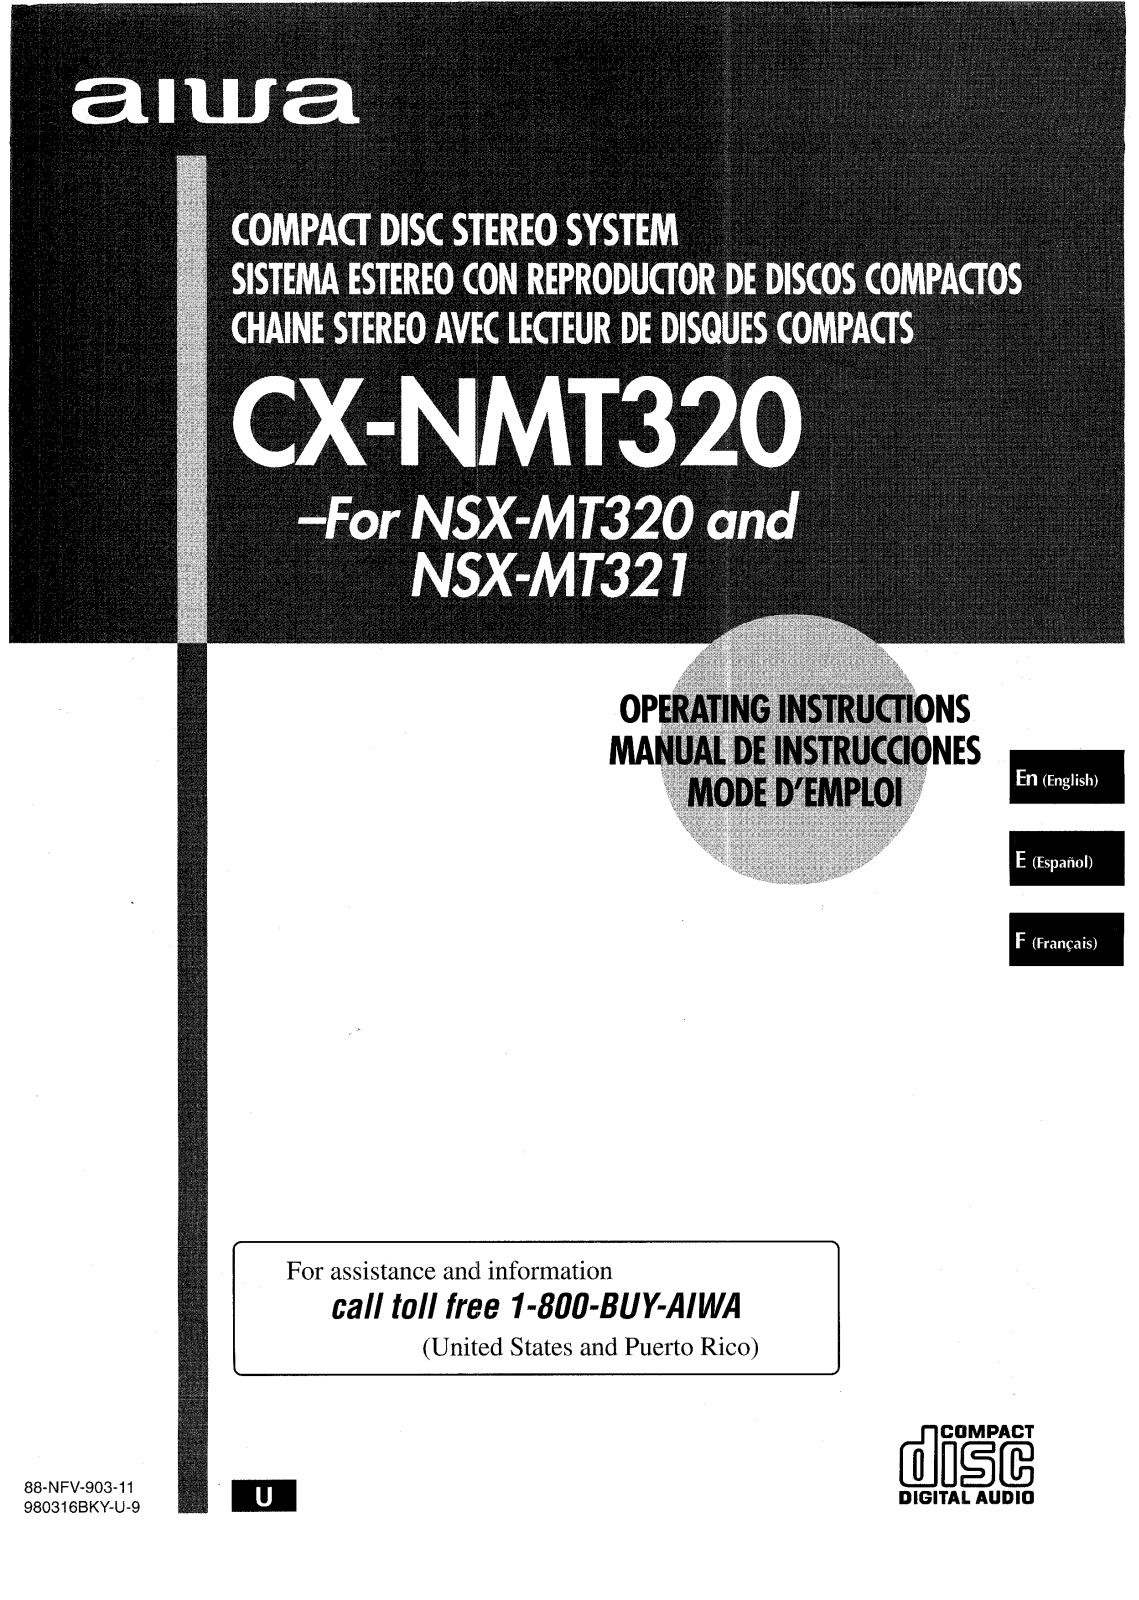 Sony CXNMT320 Operating Manual